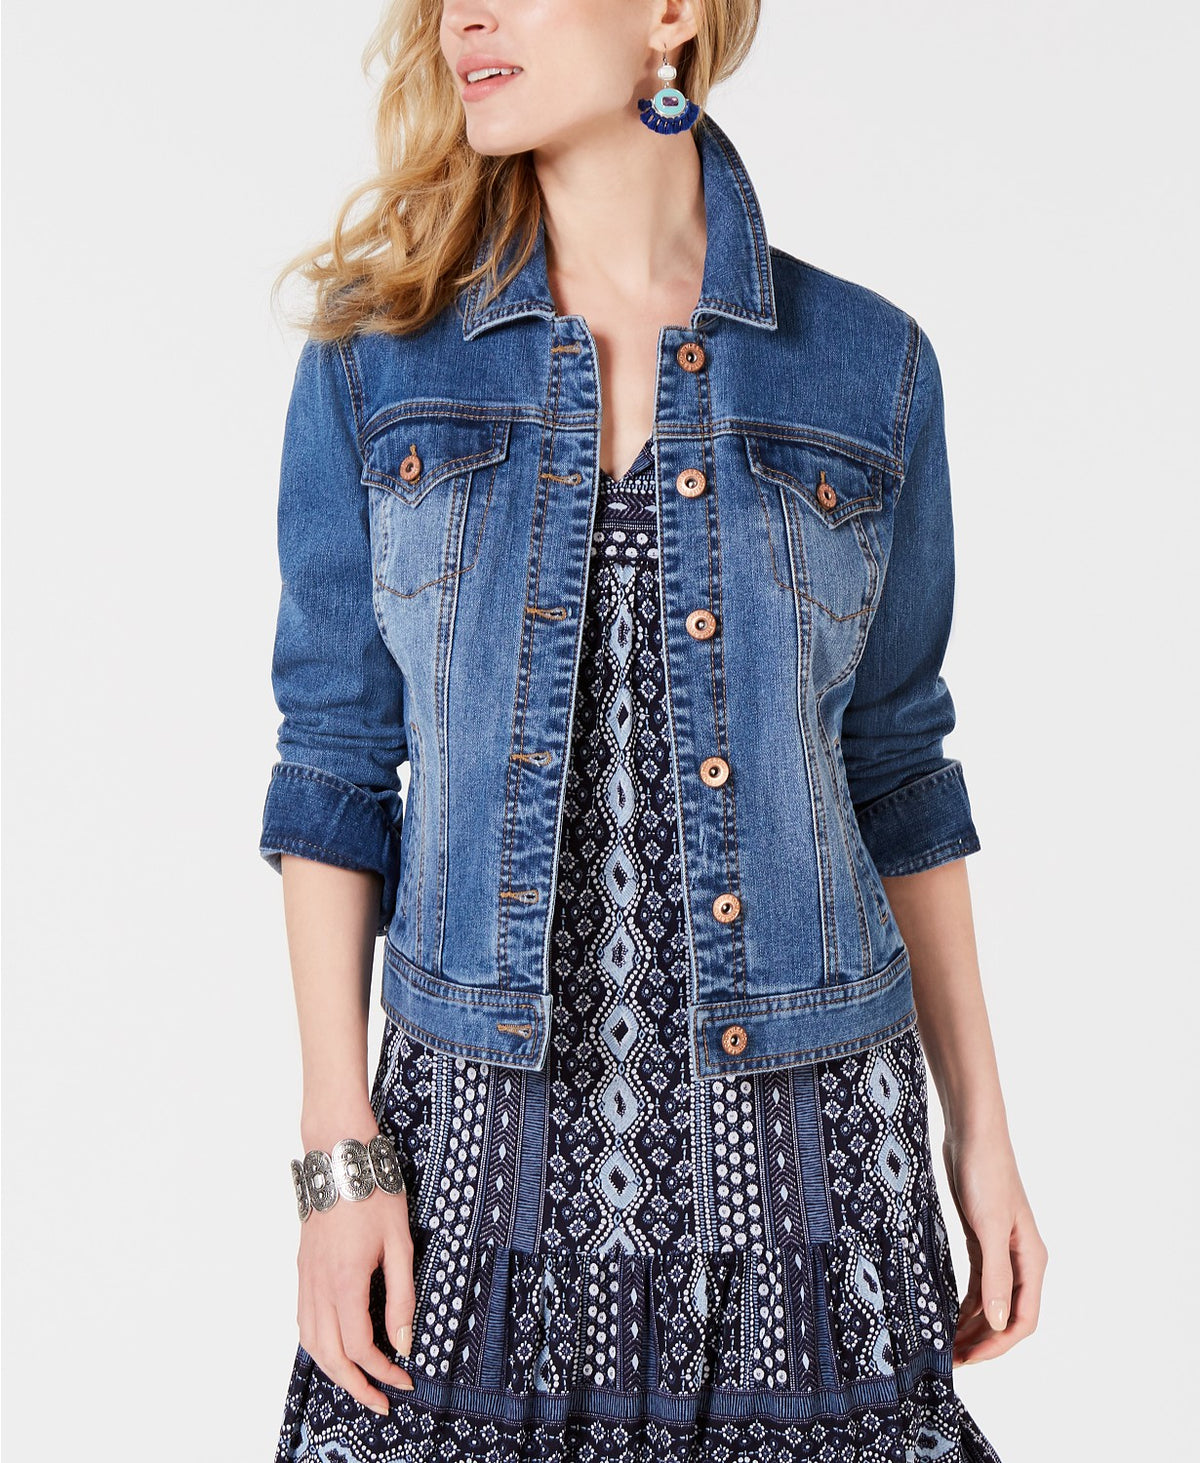 Stylish women's blue denim jacket with button detailing, worn over a patterned dress in the image.